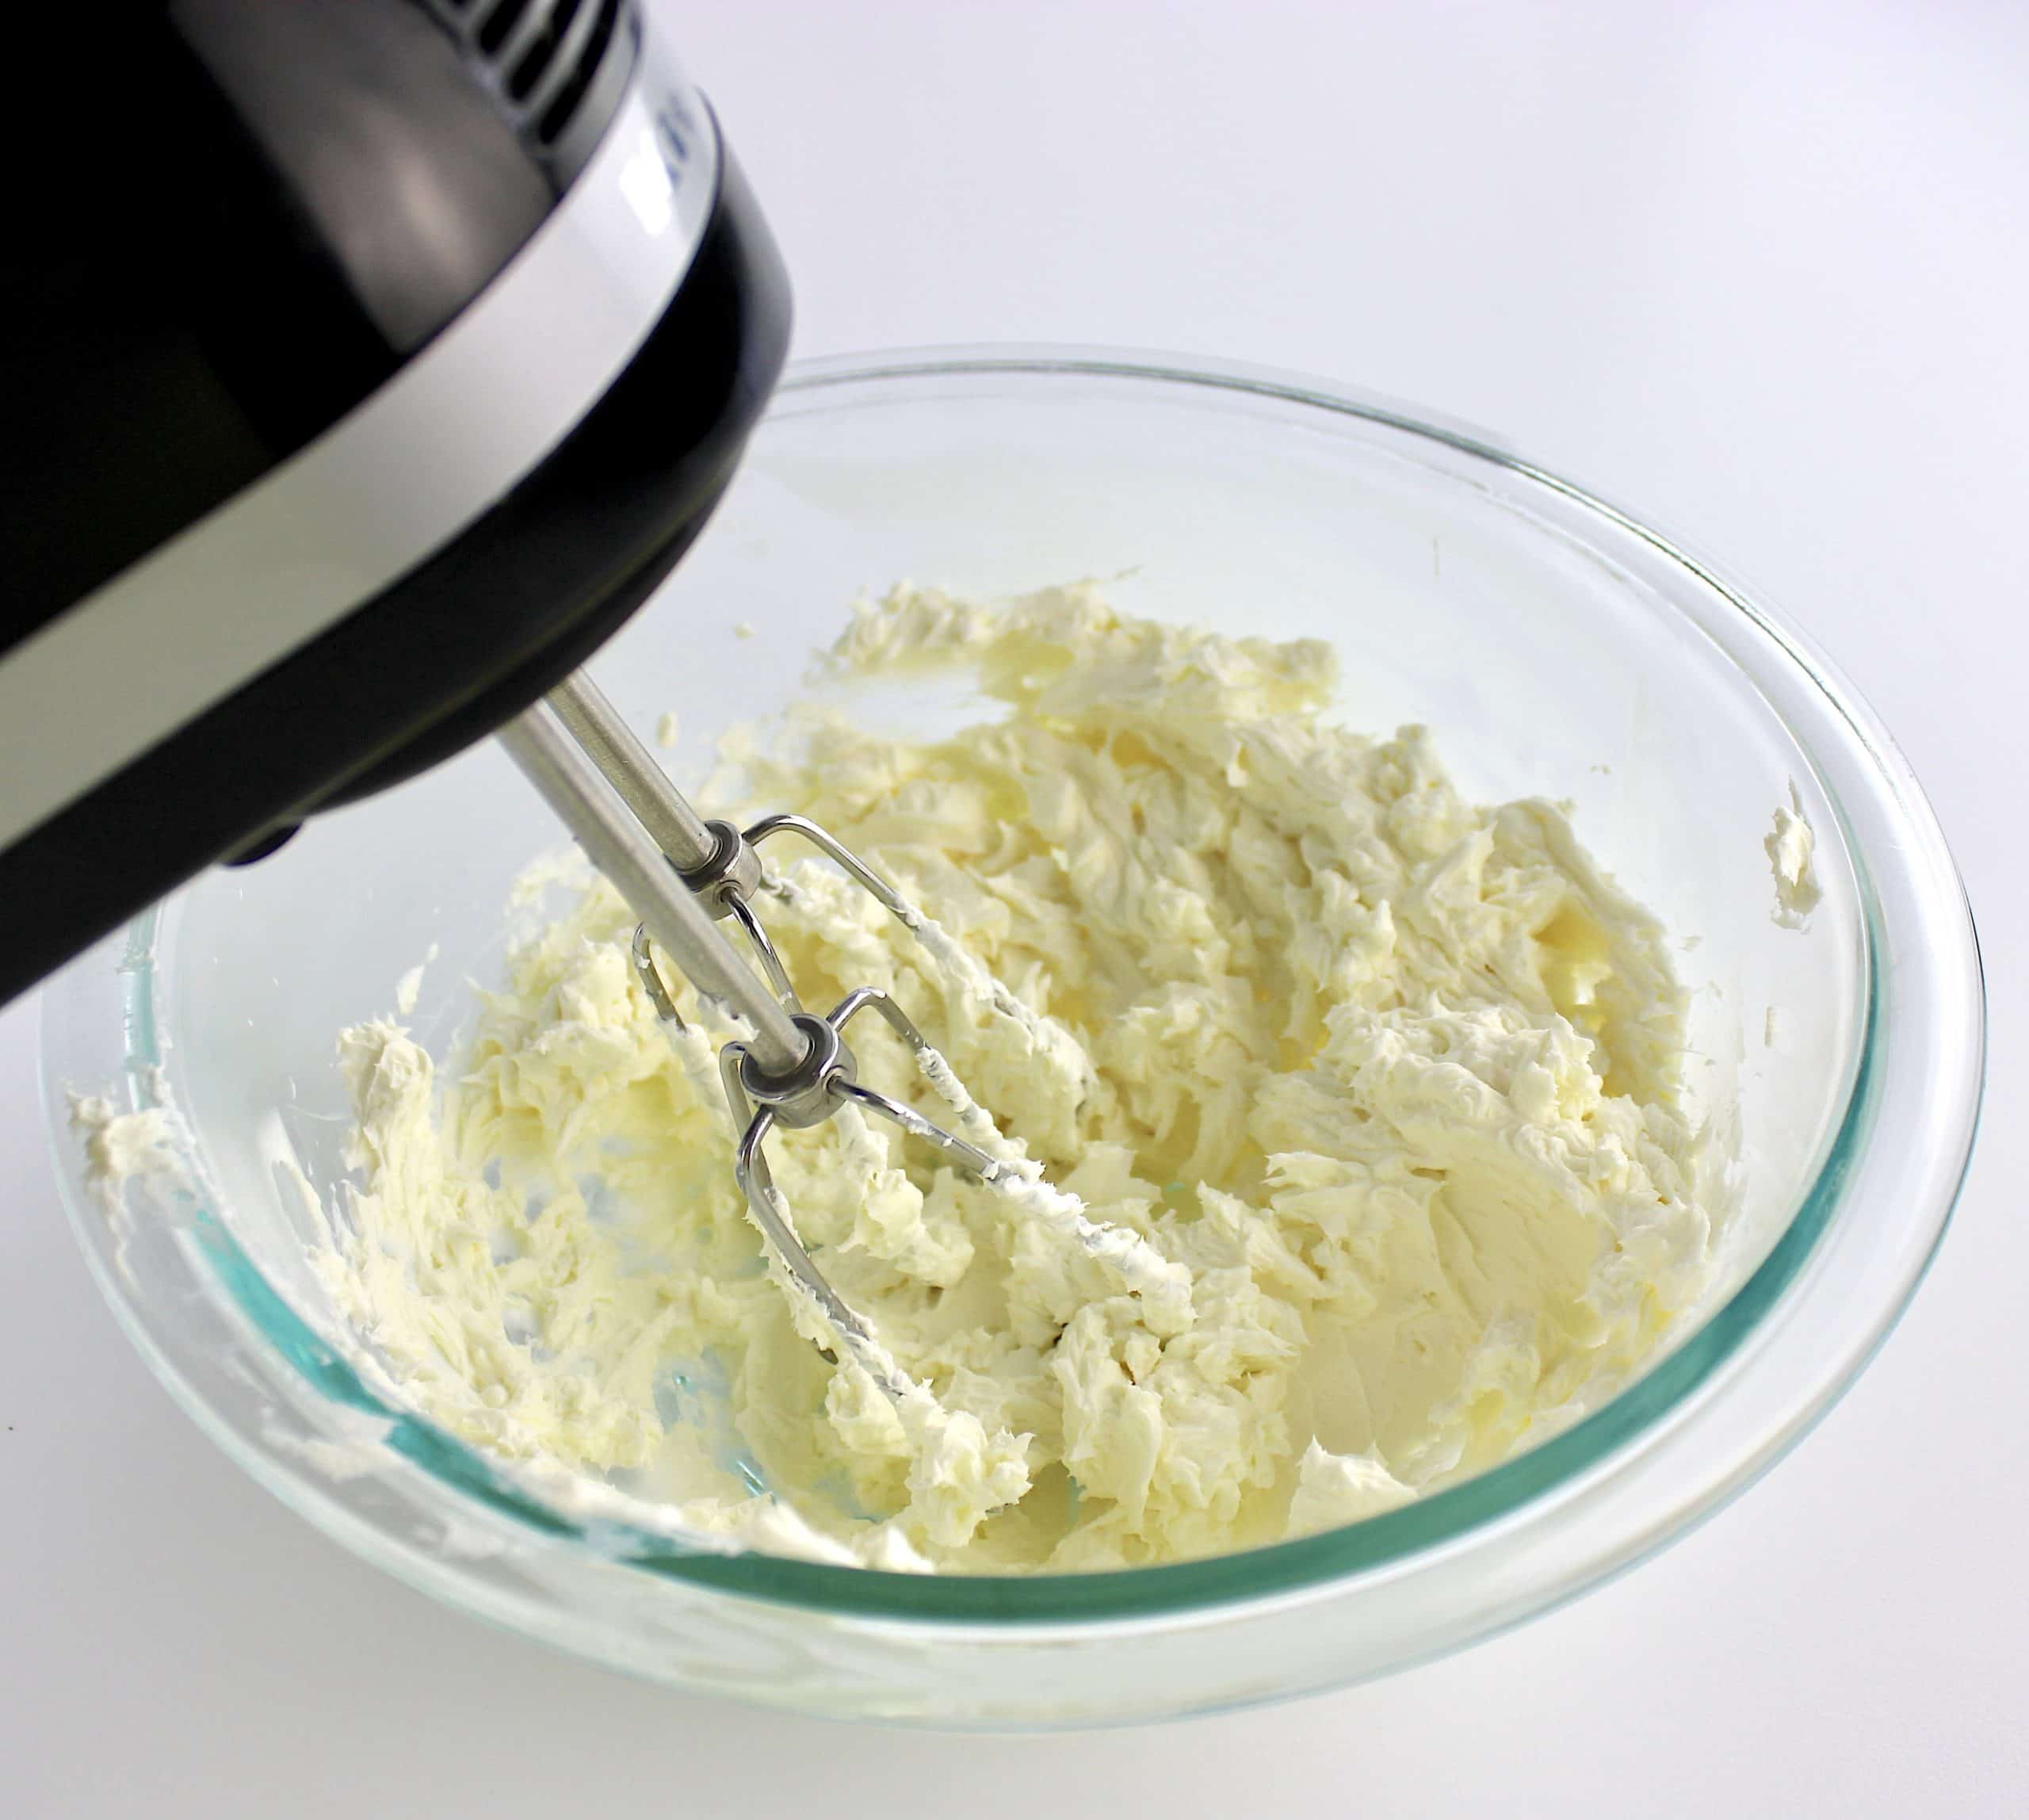 cream cheese being whipped with hand mixer in glass bowl